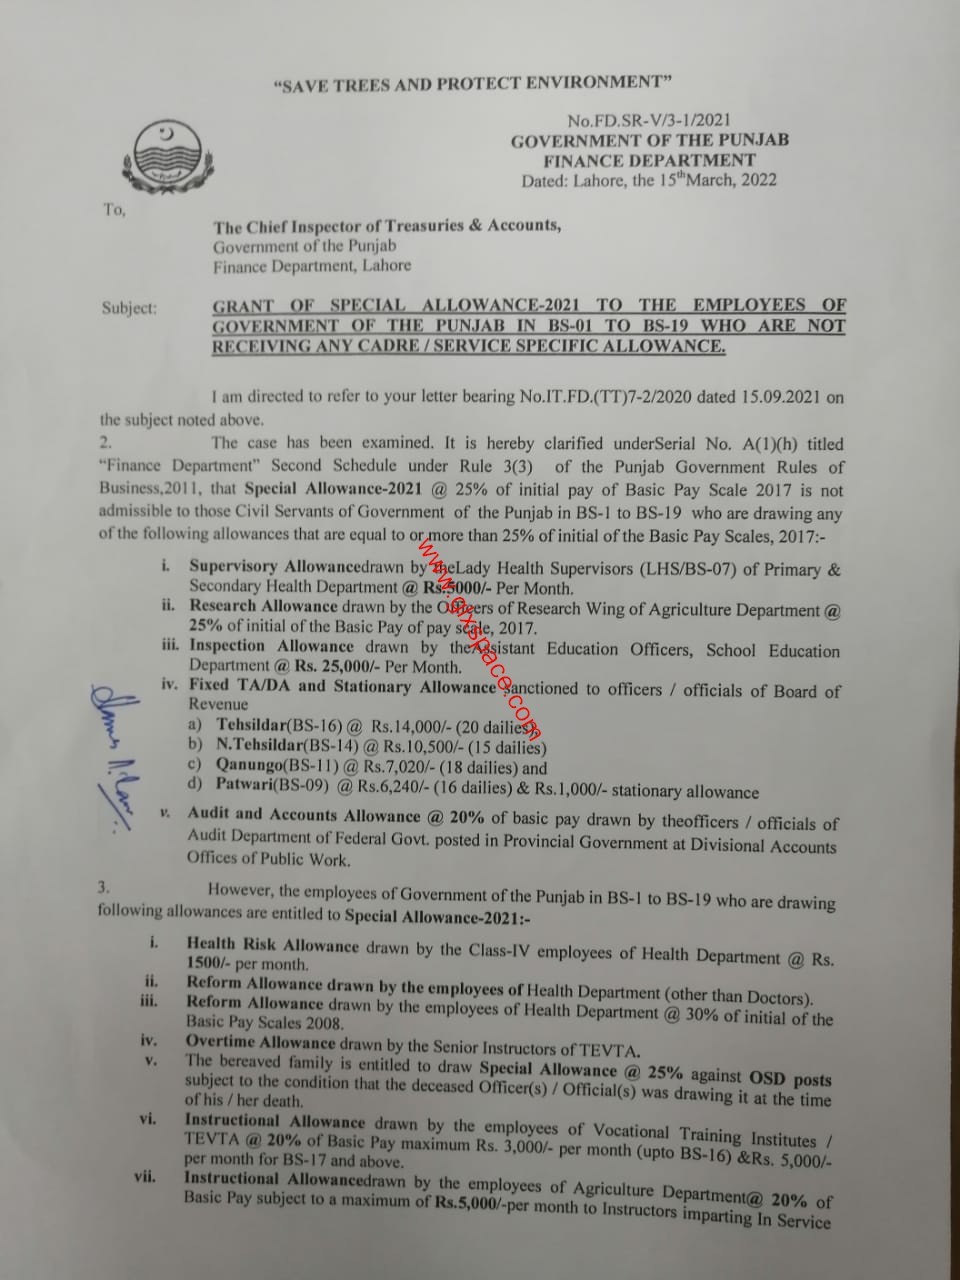 Grant of Special Allowance 2021 Punjab Employees BPS-01 to BPS-19 Clarification